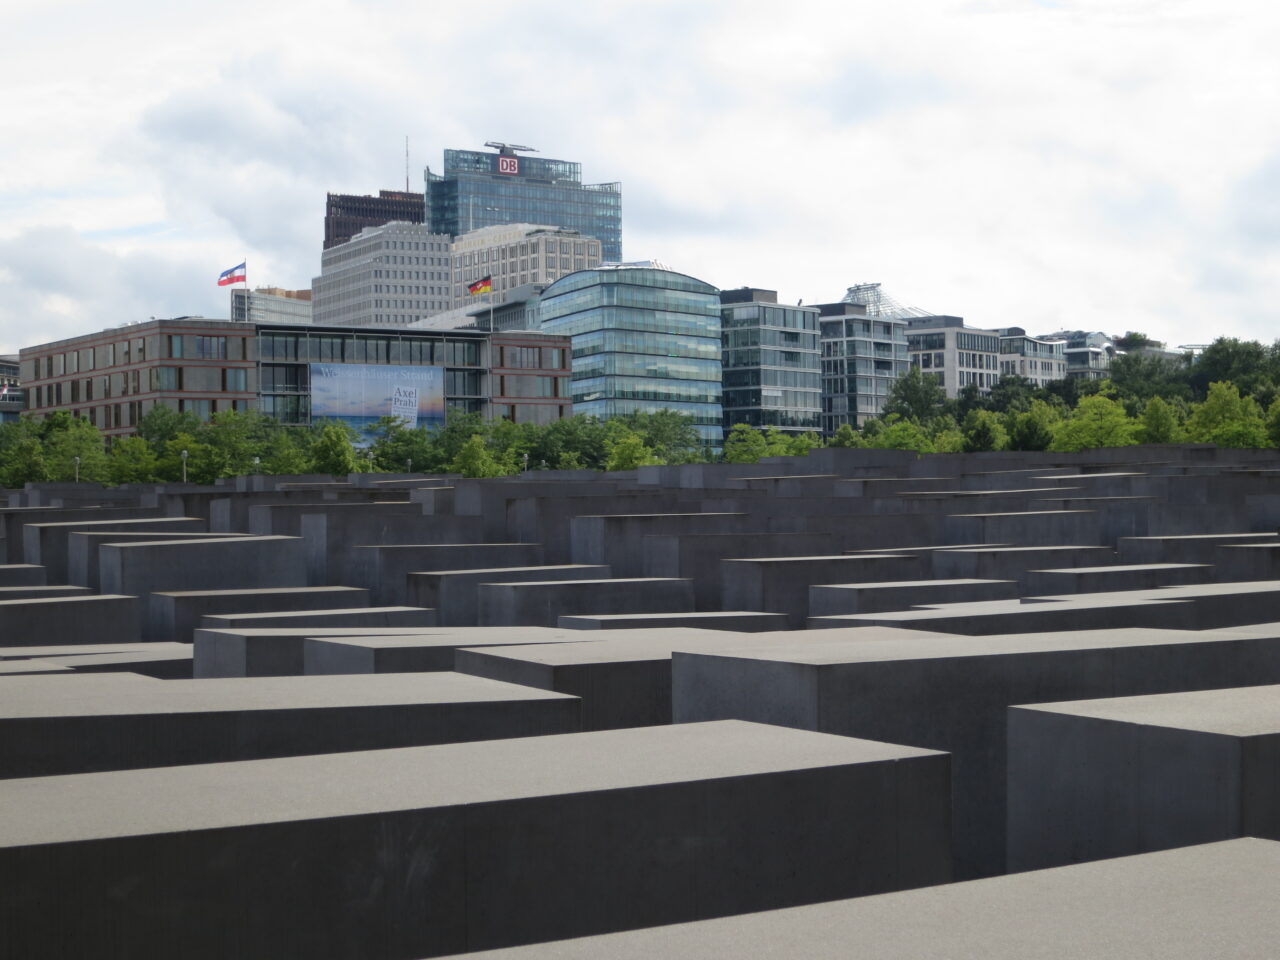 Image of the Memorial to the Murdered Jews of Europe in Berlin, Germany, 2017